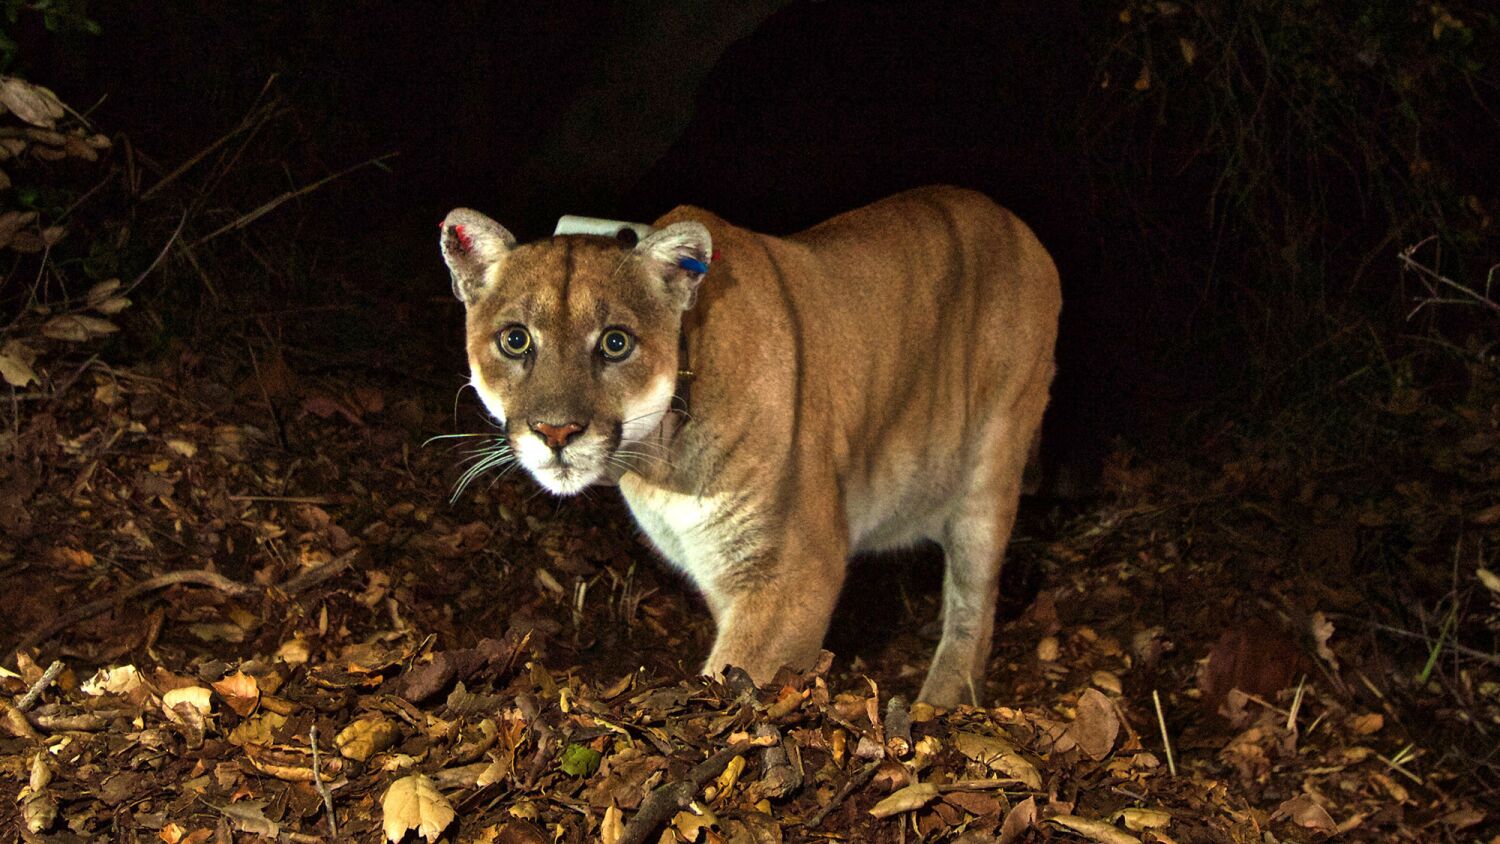 What will happen to P-22 after his capture? 'No options are off the table' for big cat